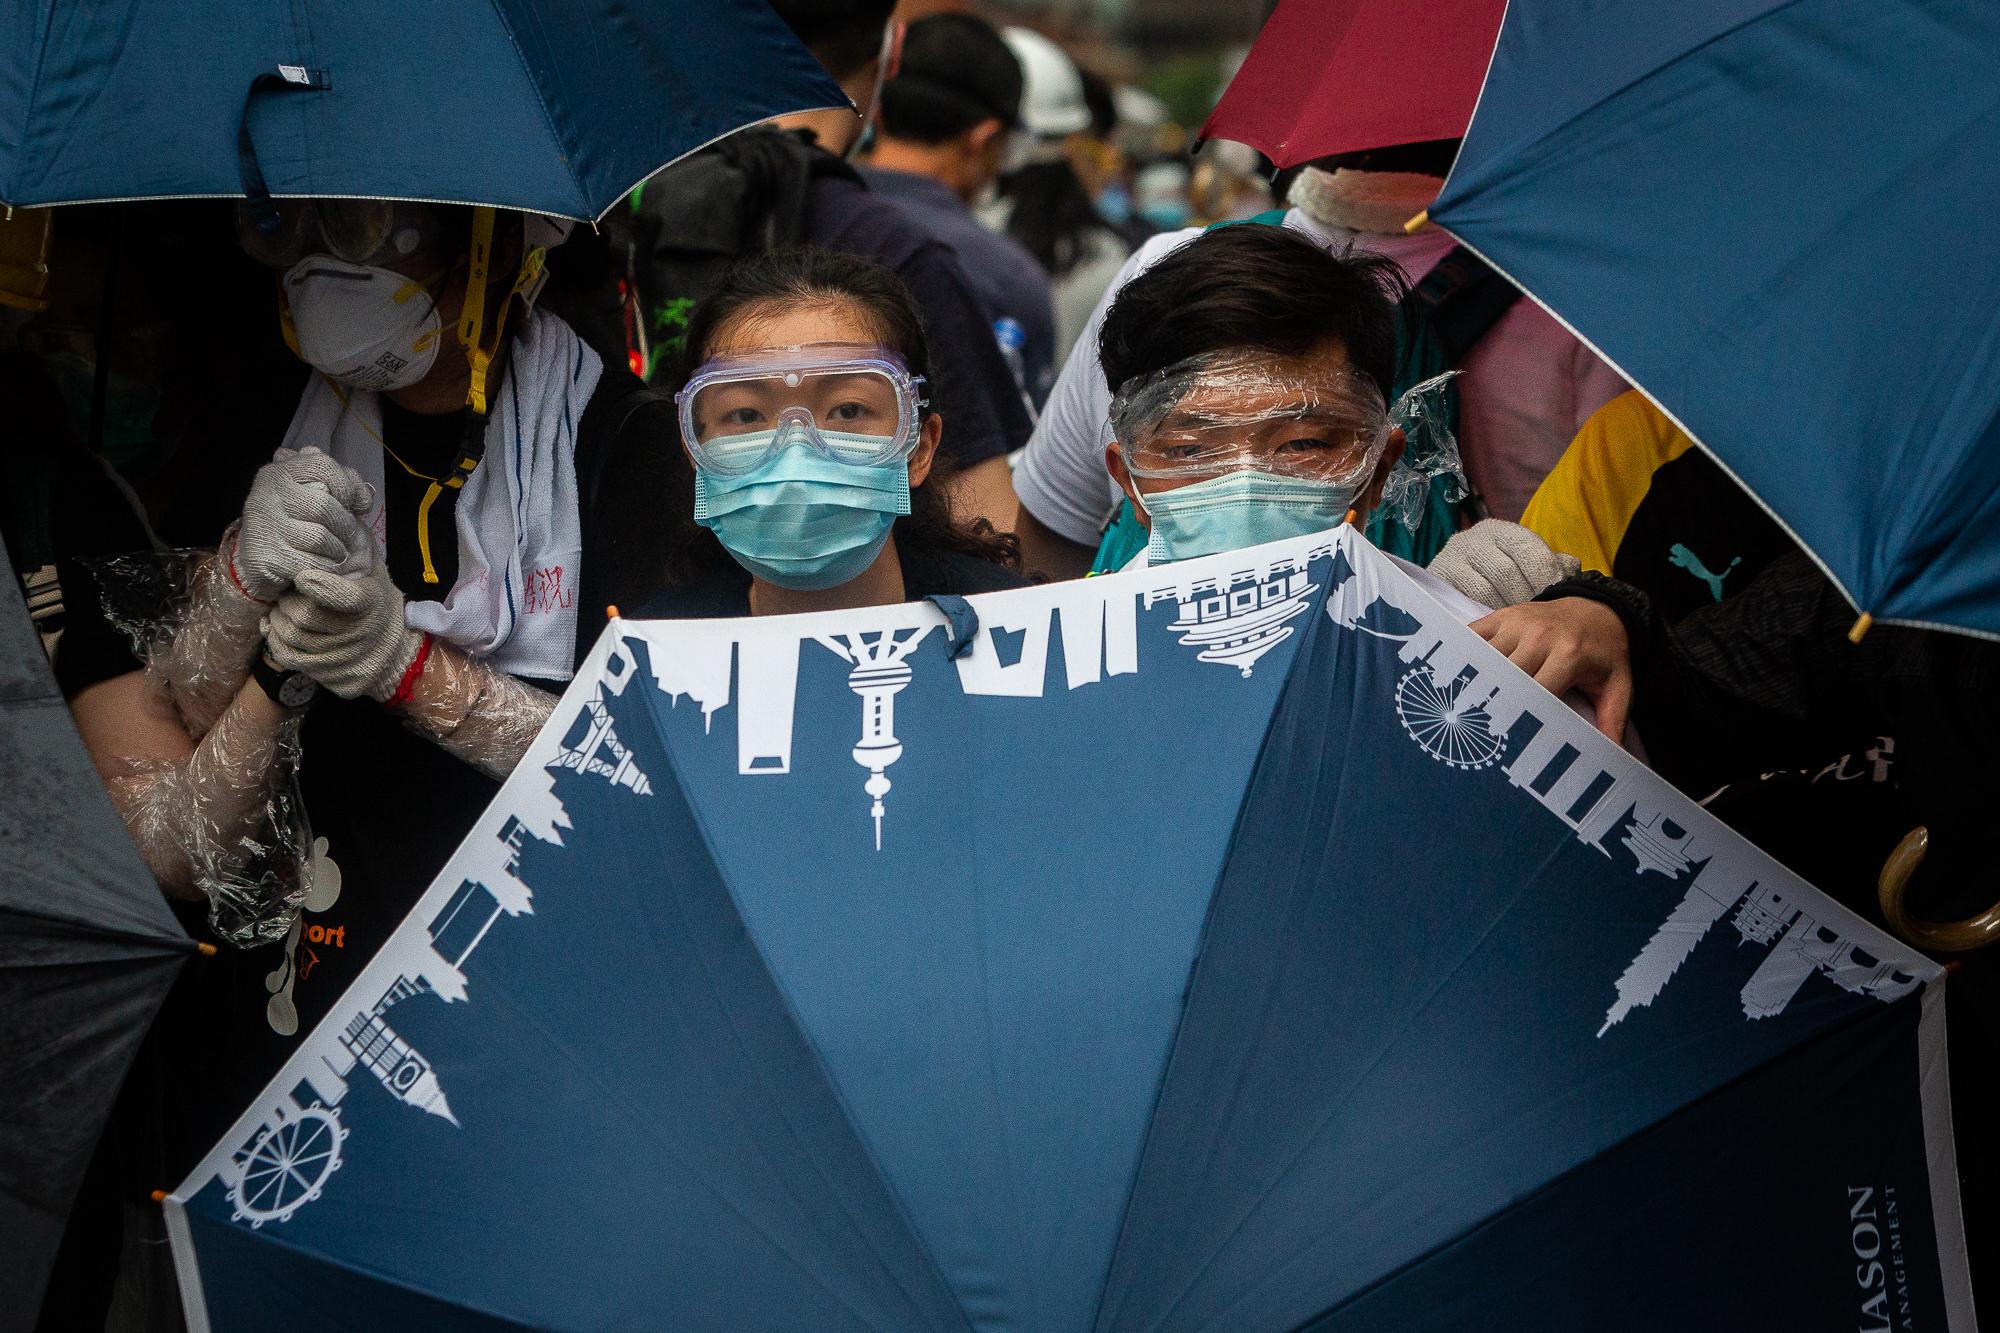 Demonstrators protect themselves behind an umbrella during a protest against a proposed...